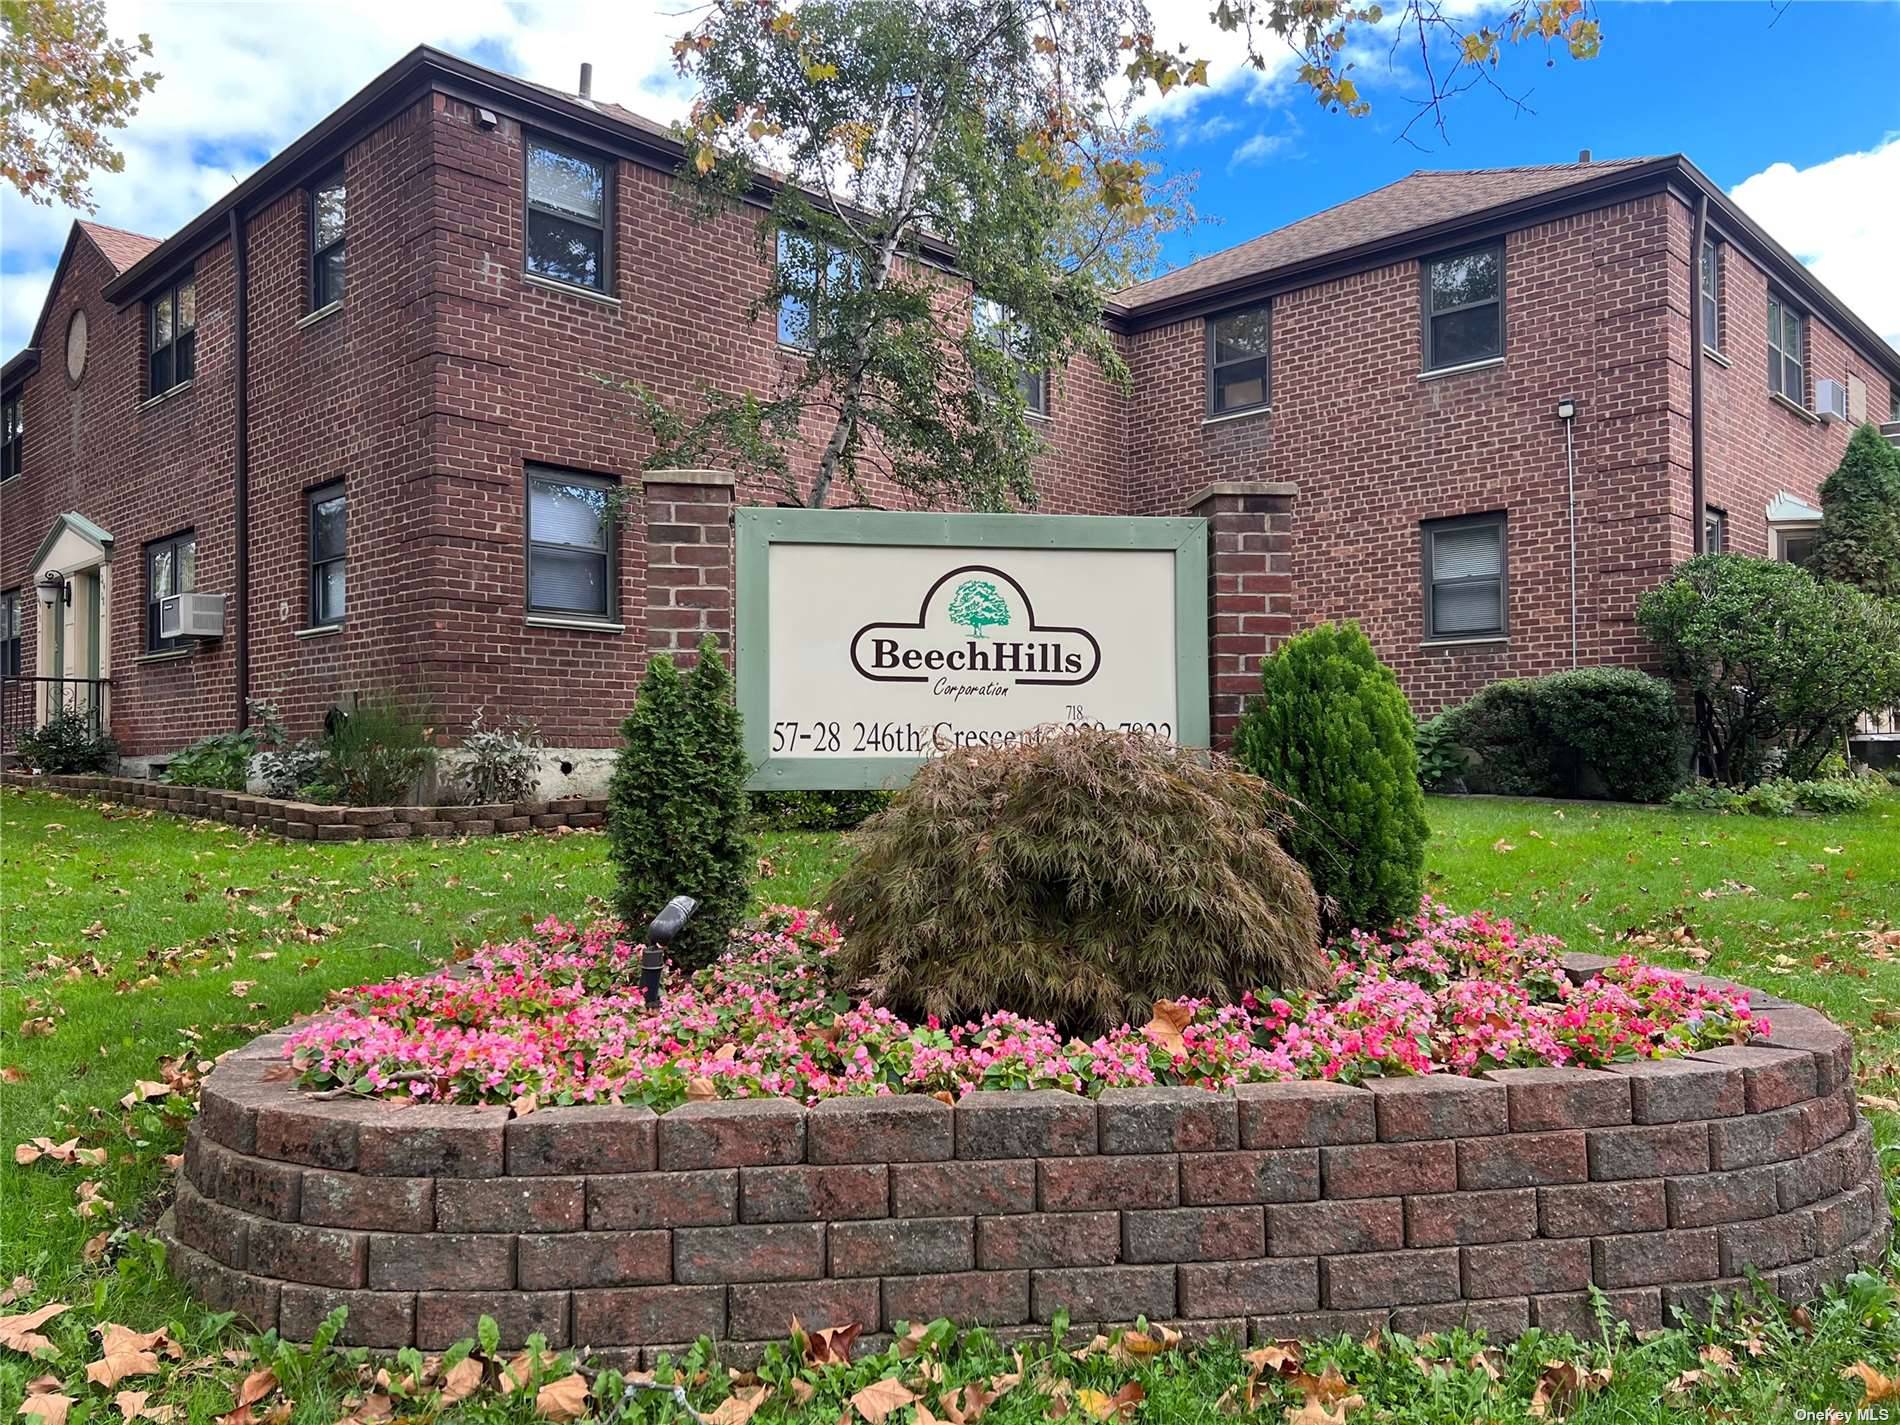 Welcome to A beautiful upper corner unit 1 bedroom coop featuring spacious living room, dining room, large bedroom and an updated full bathroom in desirable Beech Hills community.